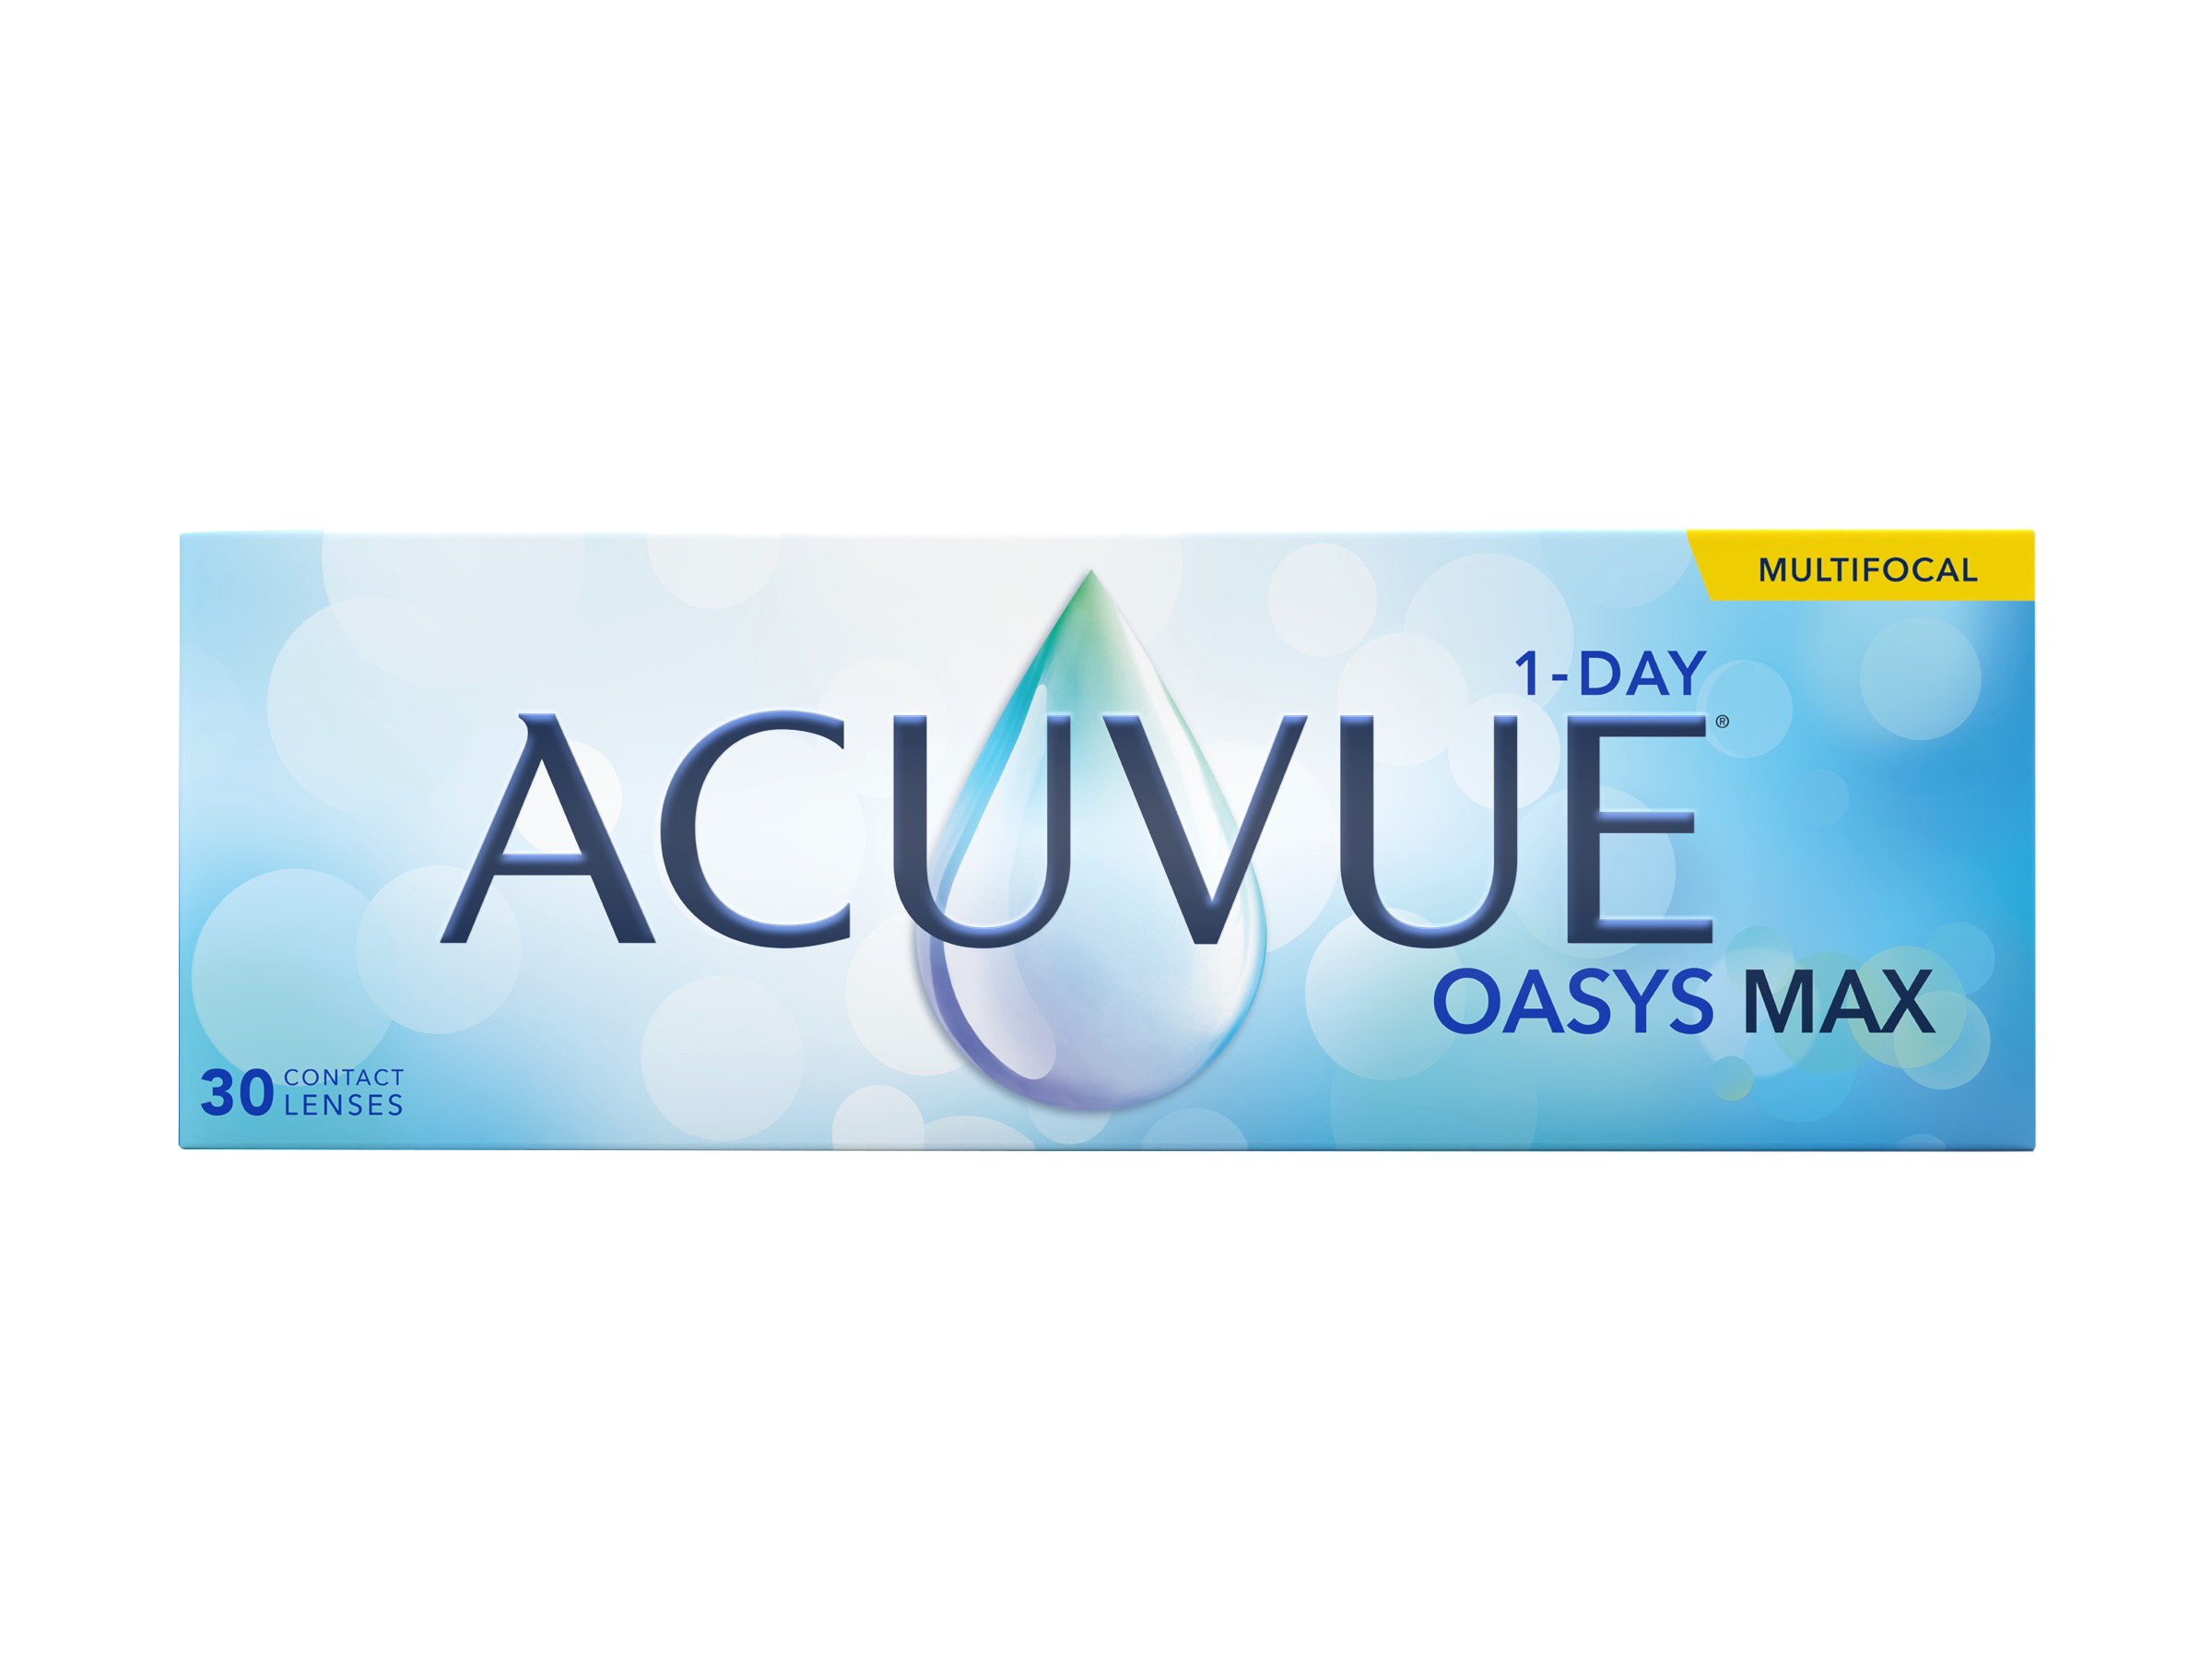 ACUVUE OASYS MAX 1 DAY MULTIFOCAL (30pk) - NEW